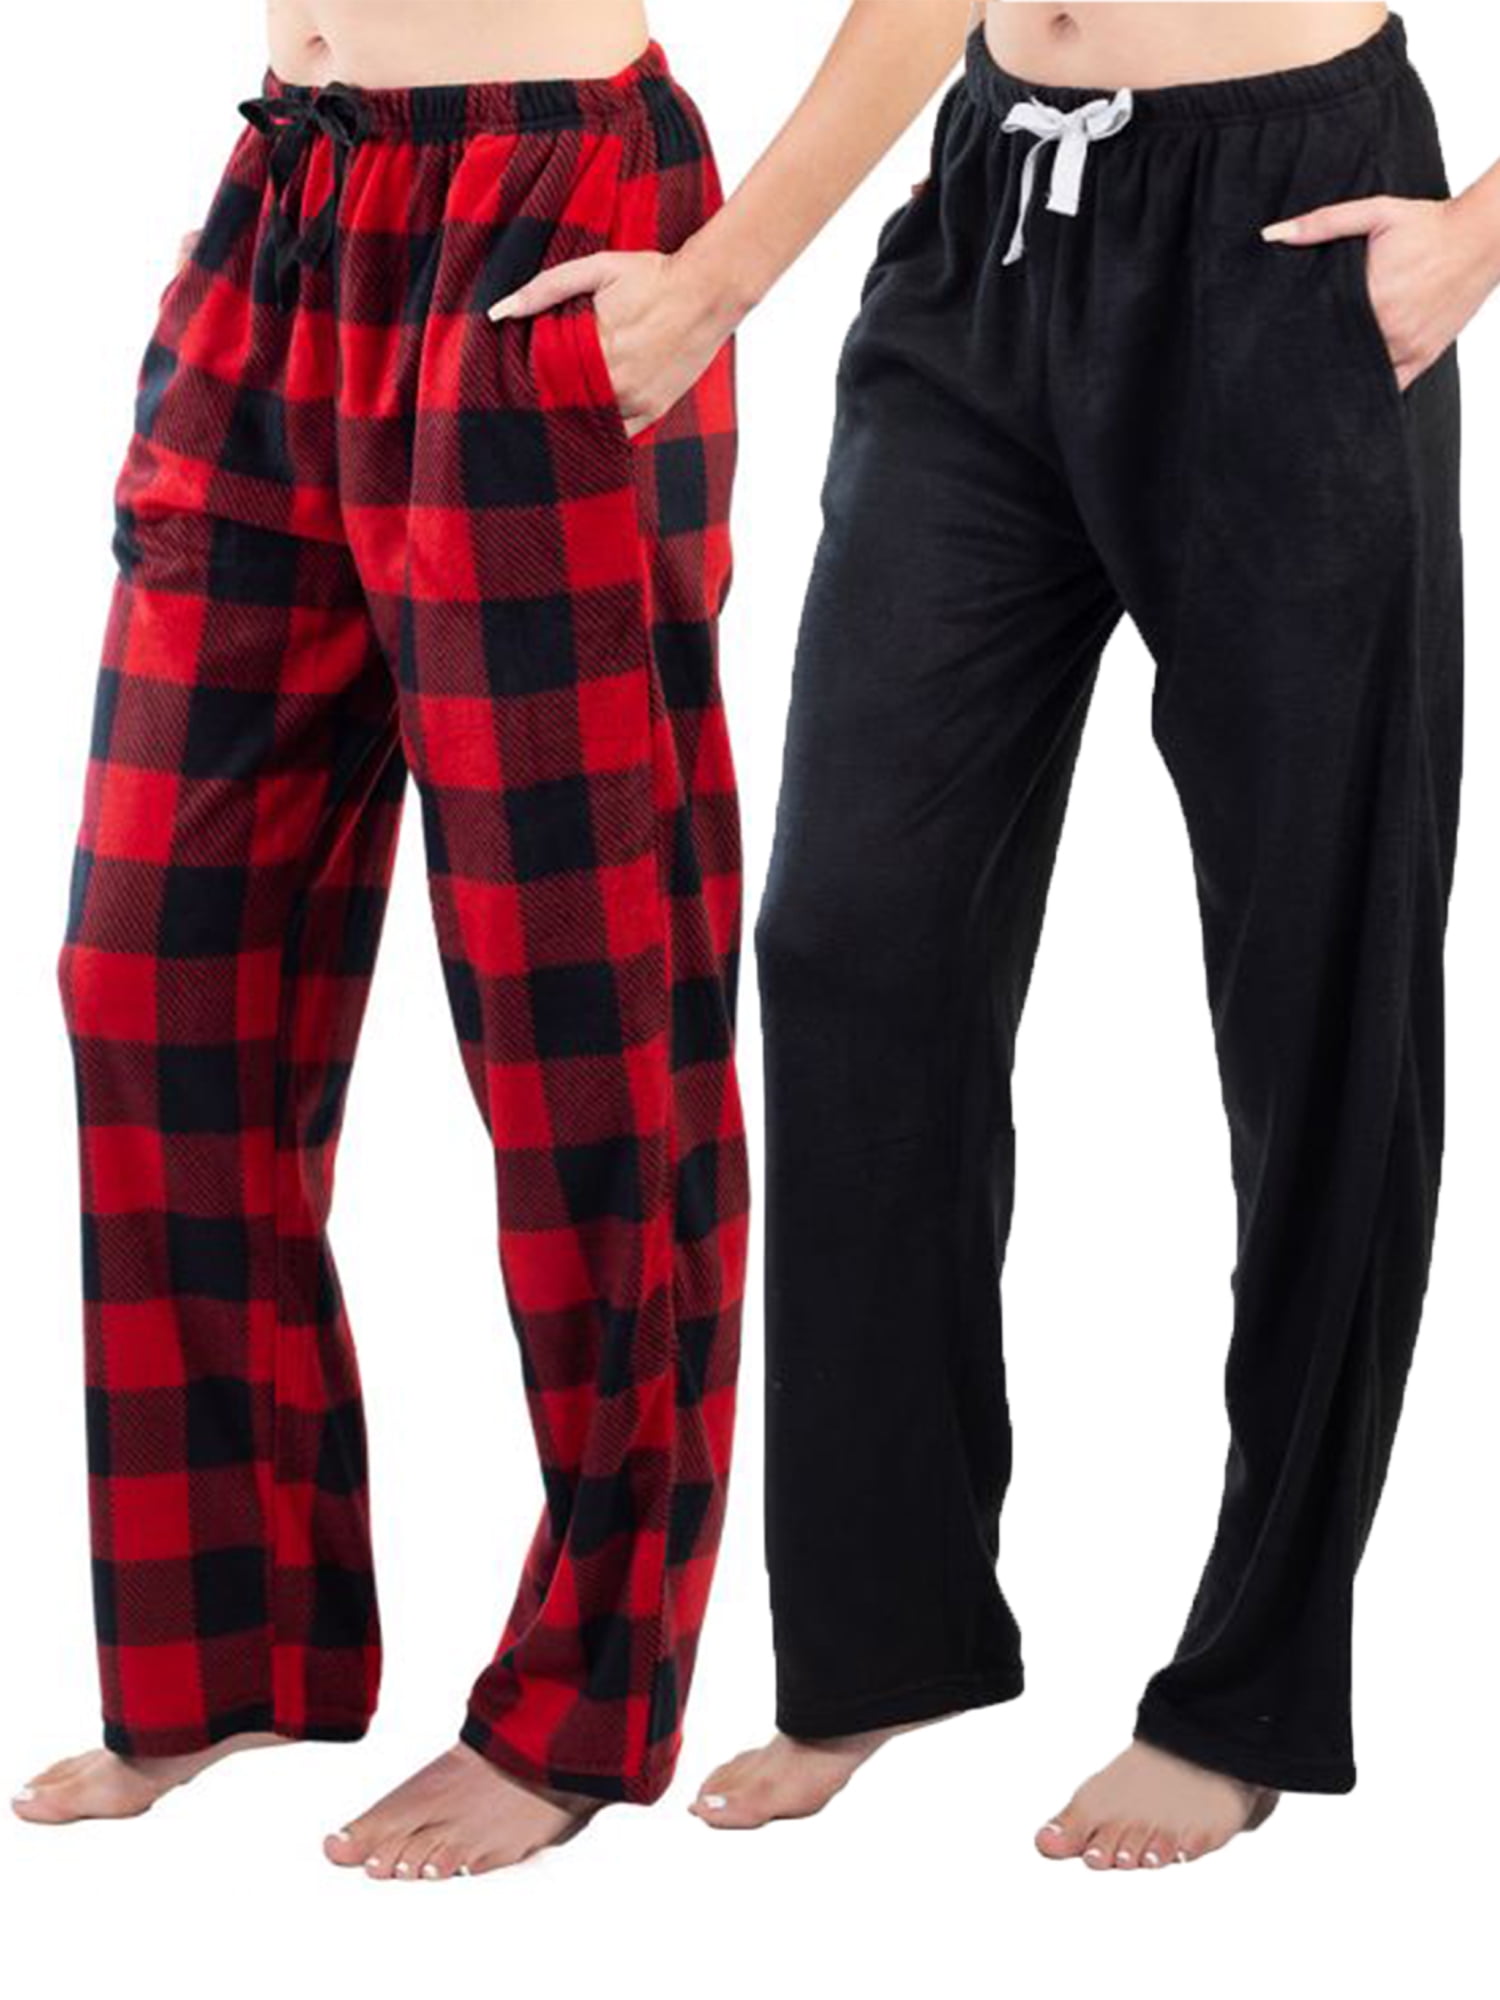 Jo & Bette Women's Fleece Pajama Pants with Pockets Plaid Comfy Lounge Pants  Regular and Plus Size, Classic Patterns at  Women's Clothing store